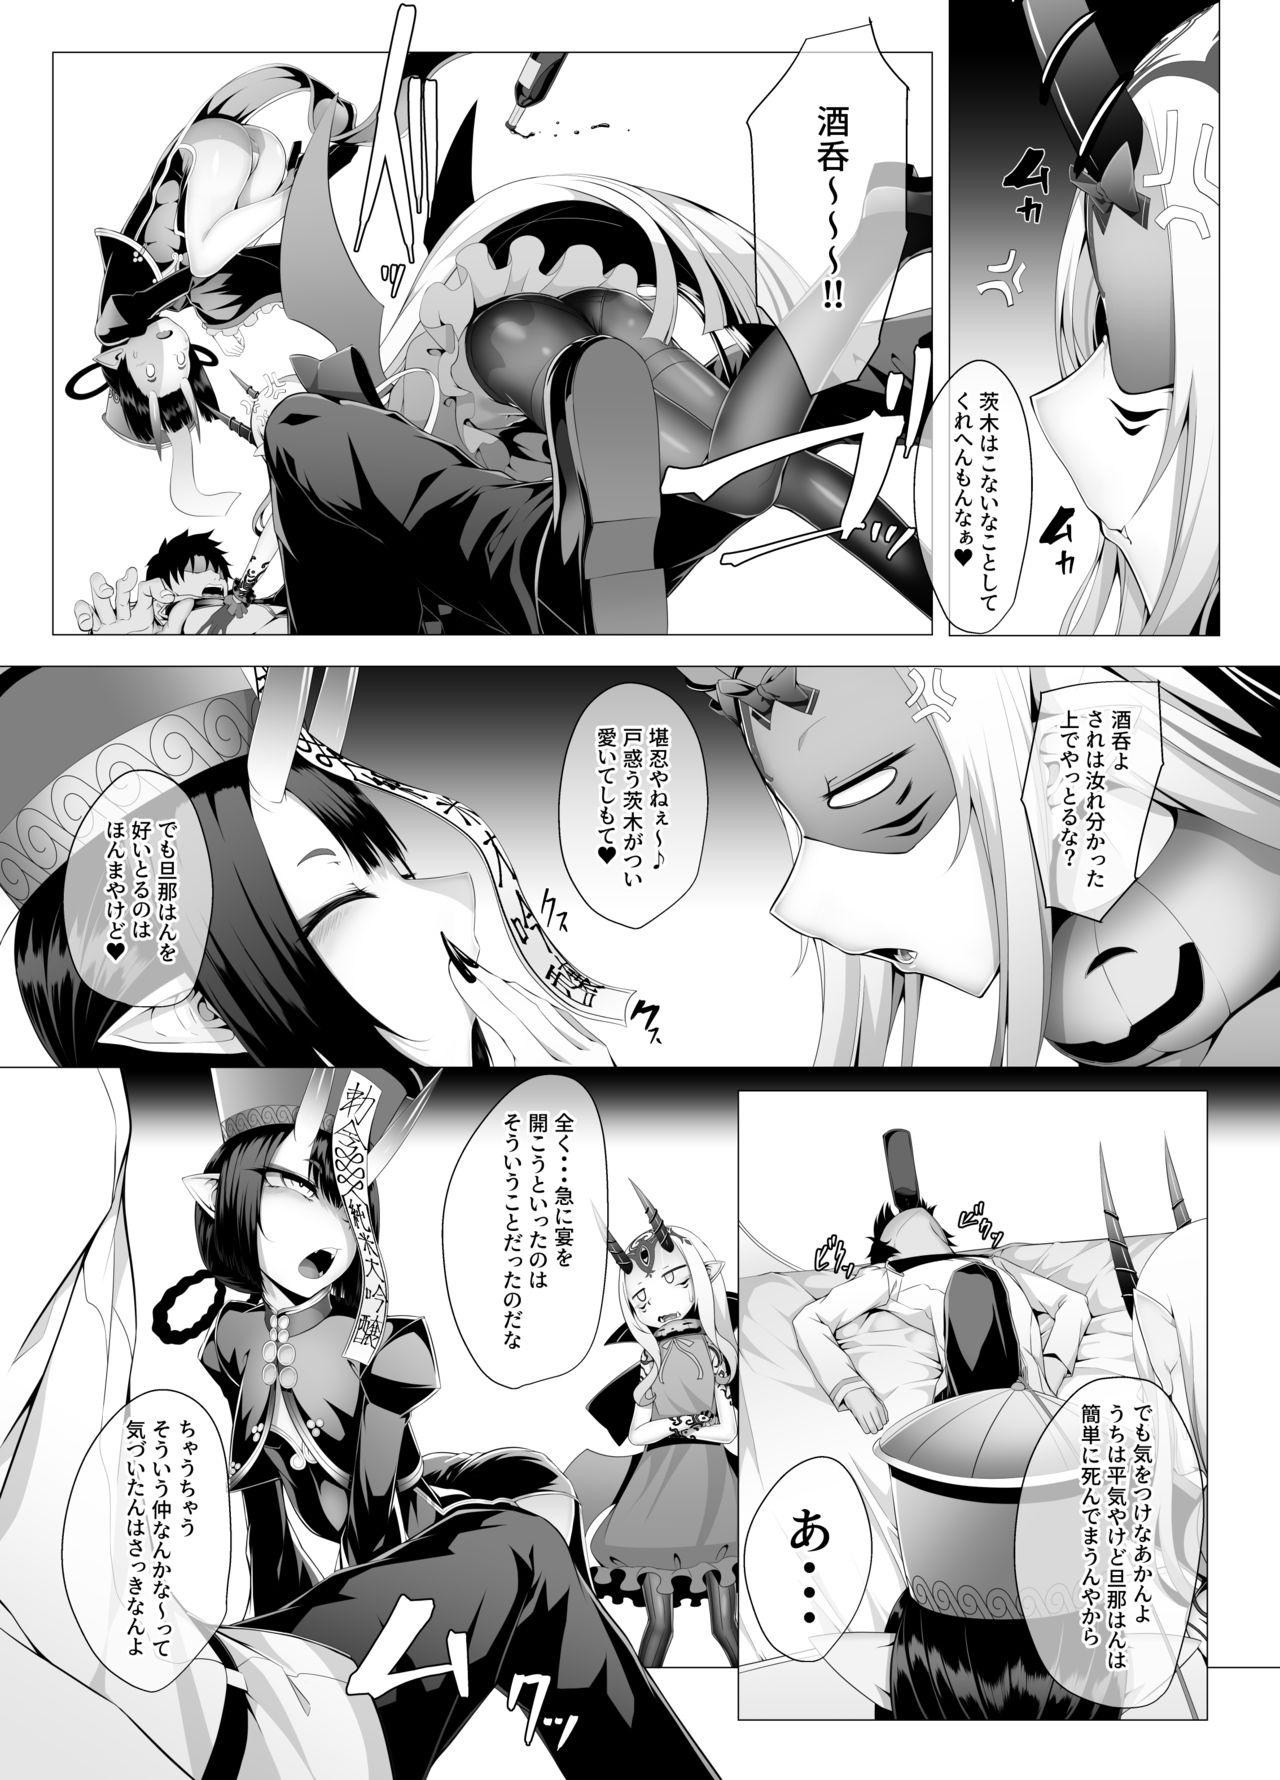 Dress M.P. Vol. 21 - Fate grand order Livecams - Page 8